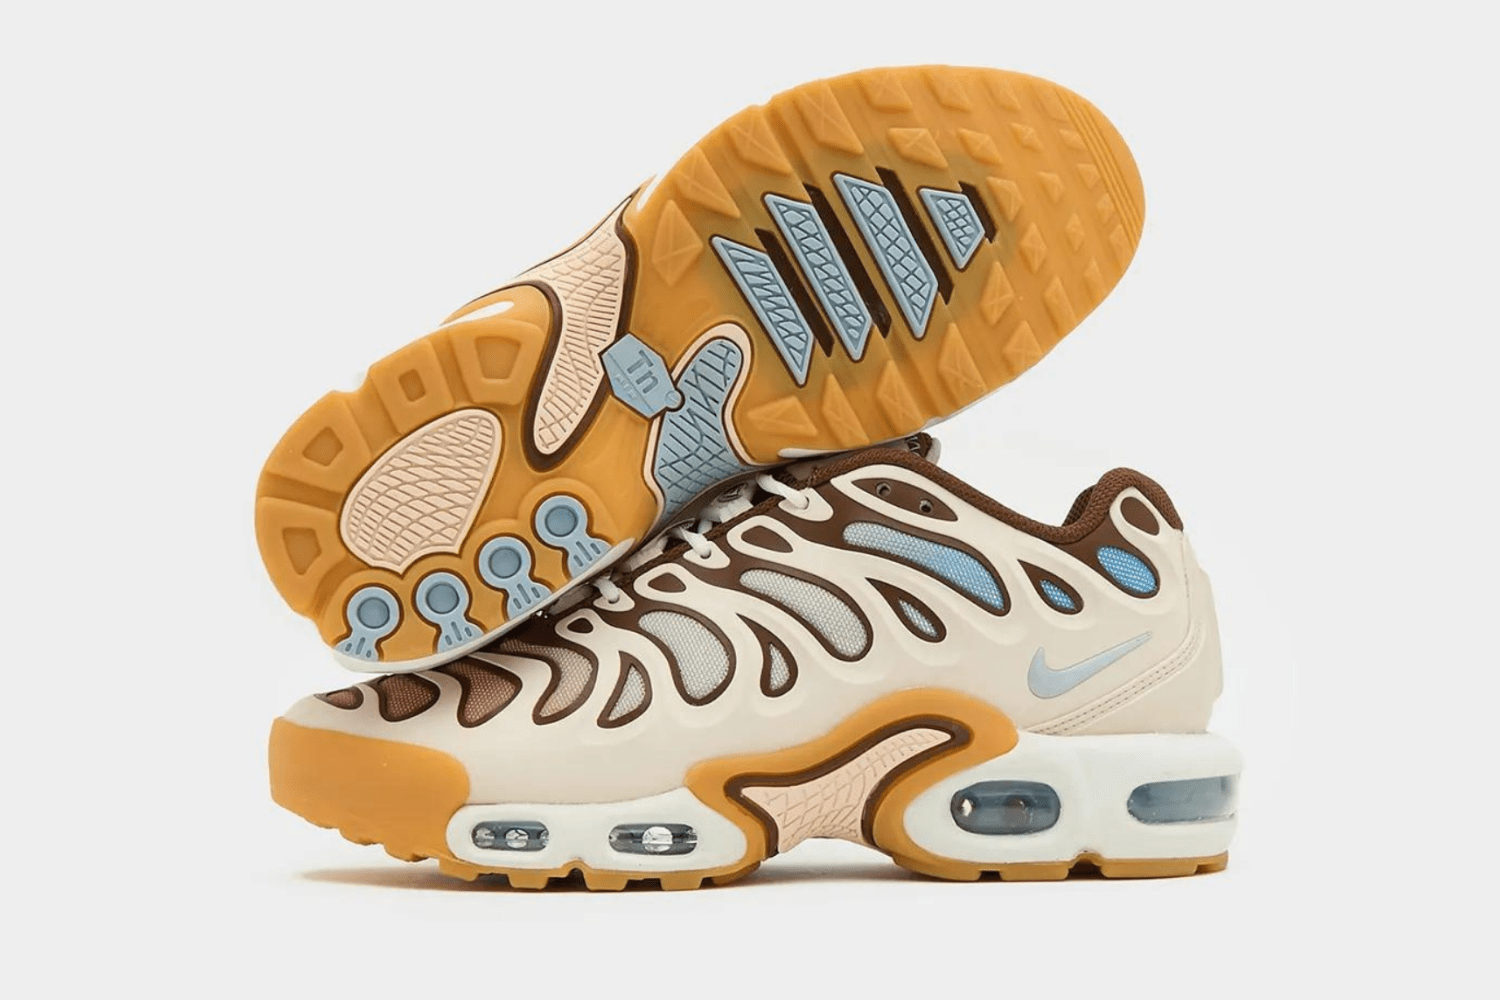 Discover the latest TN model from Nike: the Air Max Plus Drift